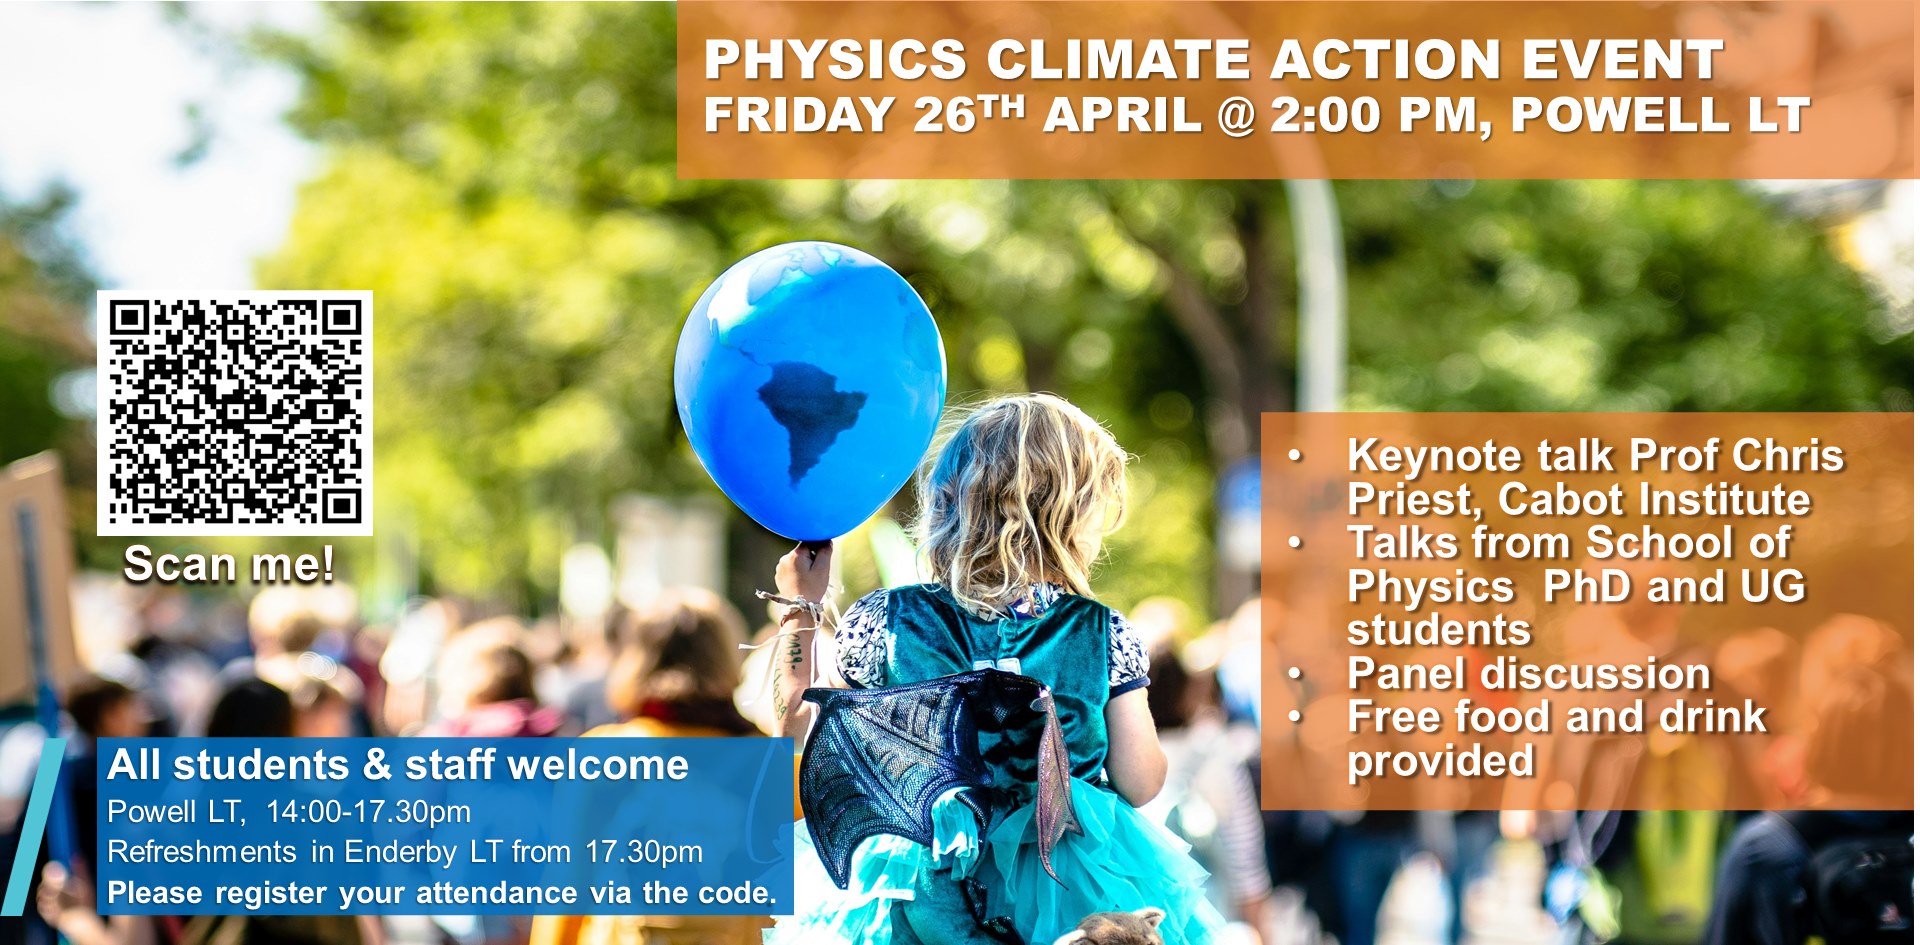 Graphic advertising Physics Climate Action Event. Boxes of text superimposed over an image of a child on an adult's shoulders - the child is holding a balloon. Top text reads: 'Physics Climate Action Event. Friday 26th April @ 2:00PM, Powell LT.' 